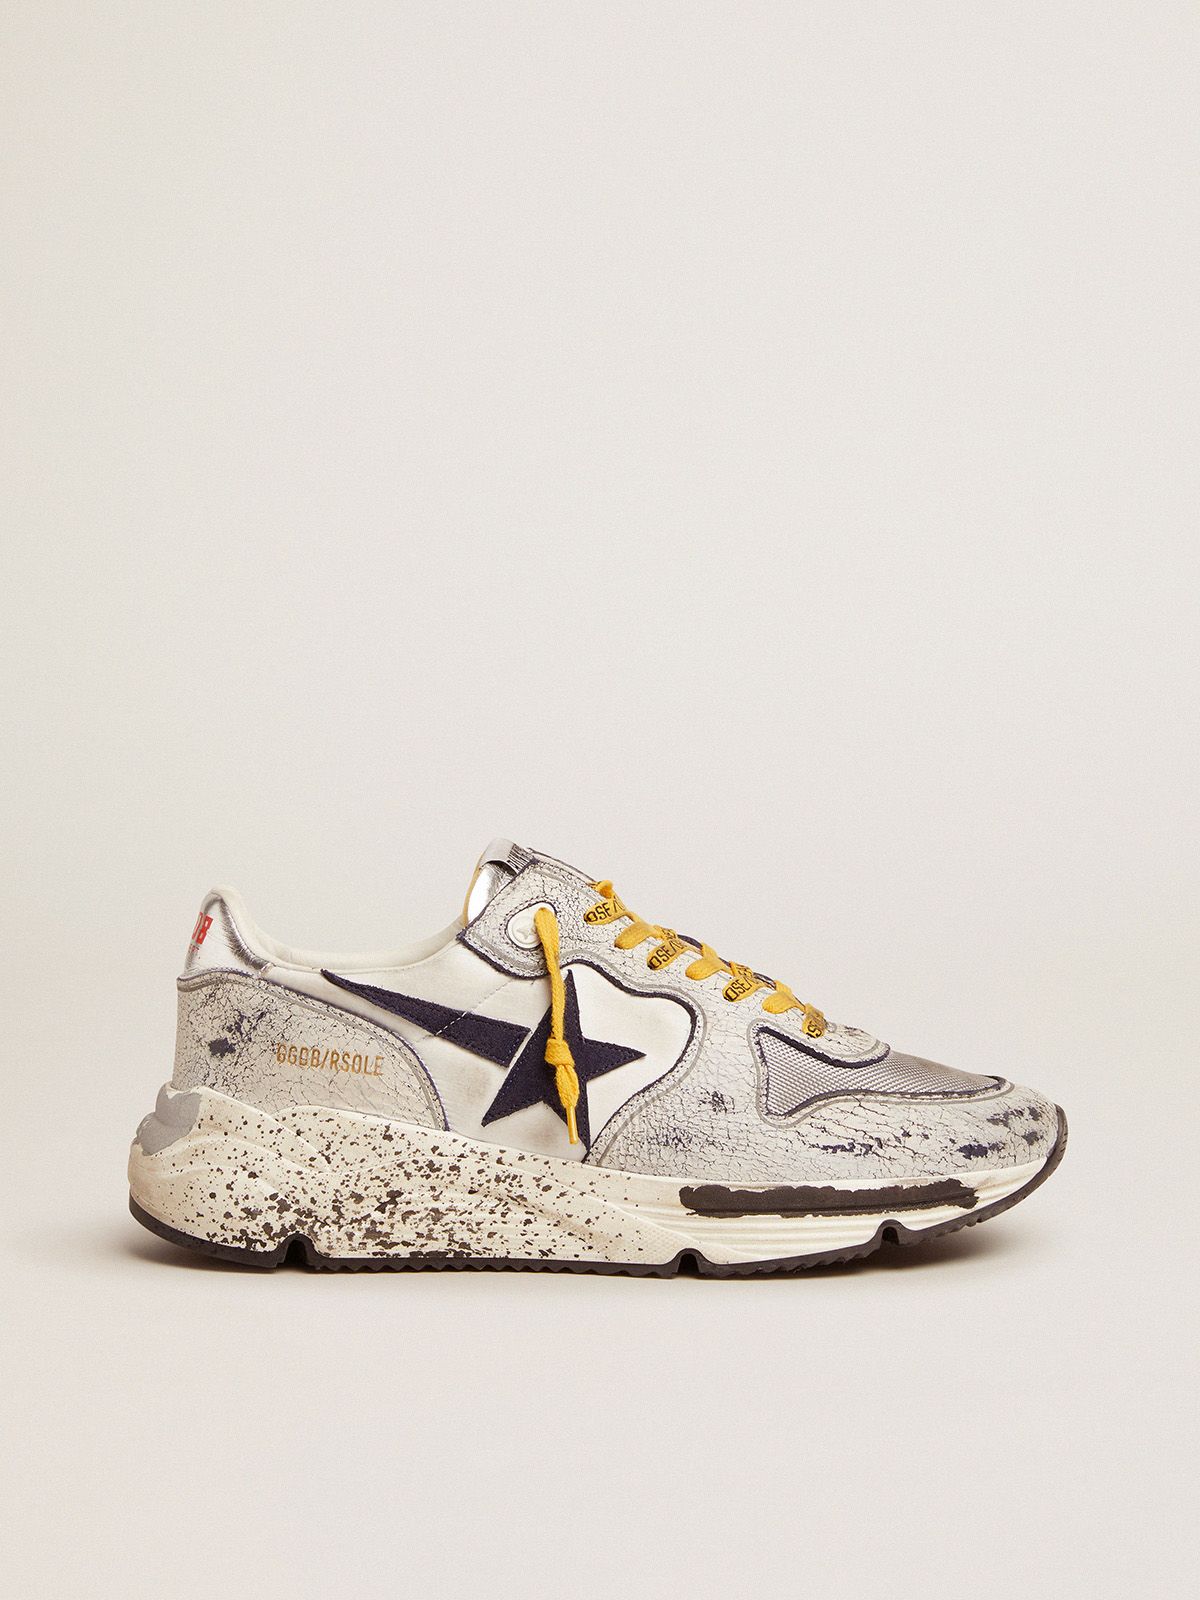 golden goose inserts nylon crackle sneakers Running white with in leather Sole